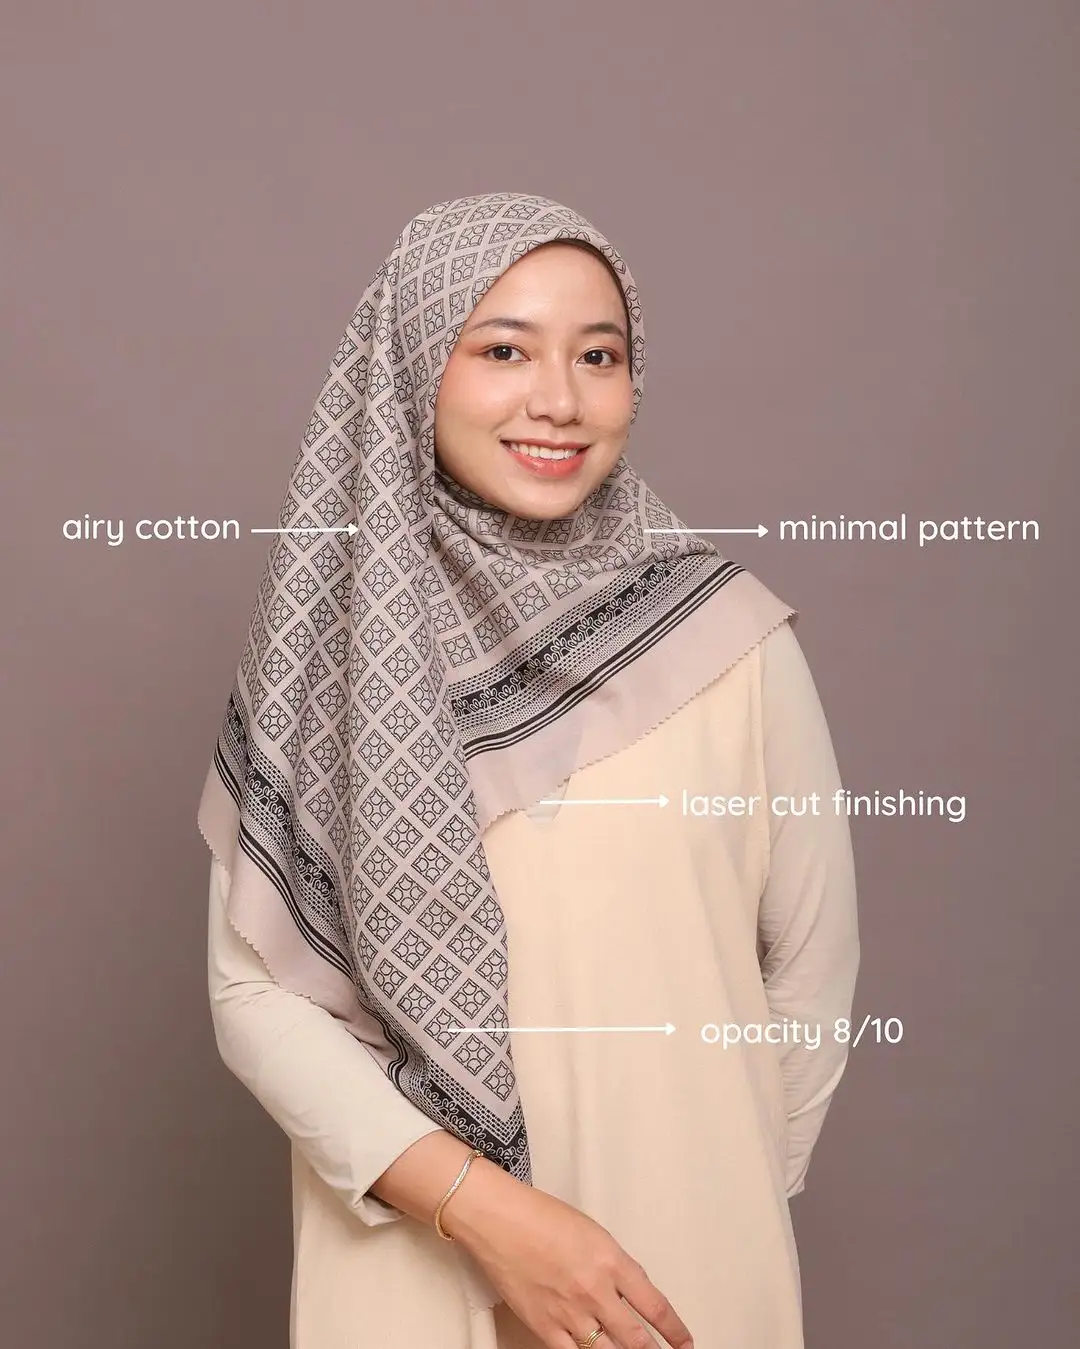 modesty printed jumbo size cotton voile square scarf malaysia bawal hijab scarves shawls japanese voile 40S for muslim women